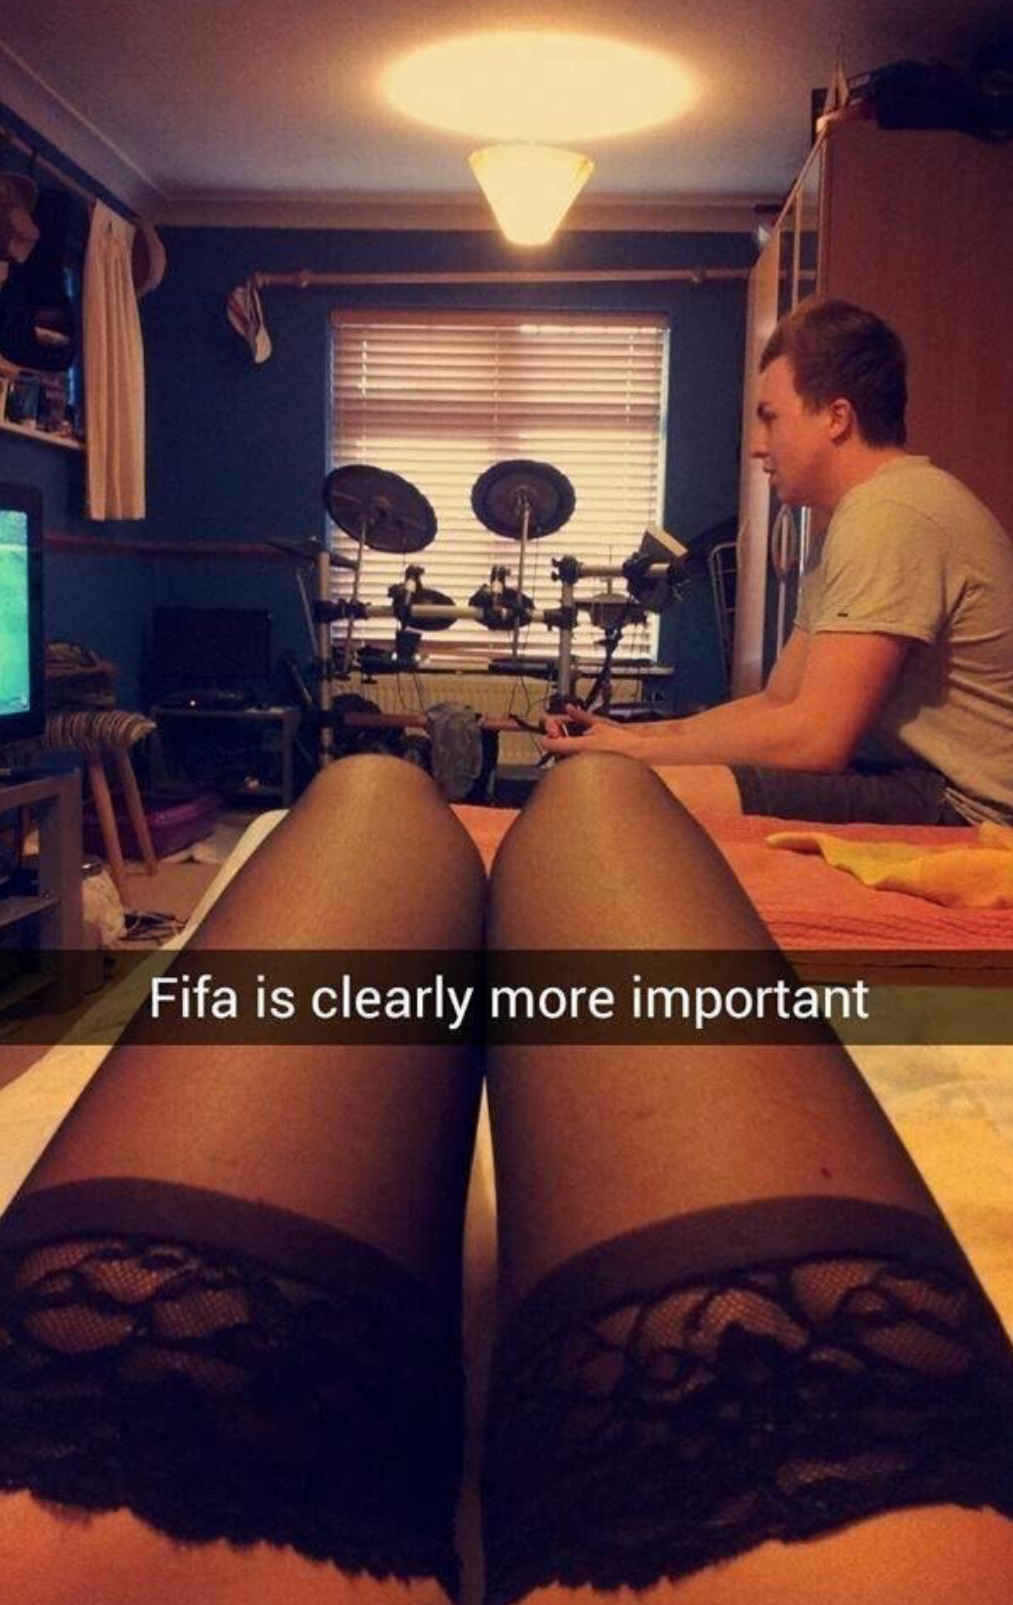 the best snapchat fails and comedy snaps around image 20